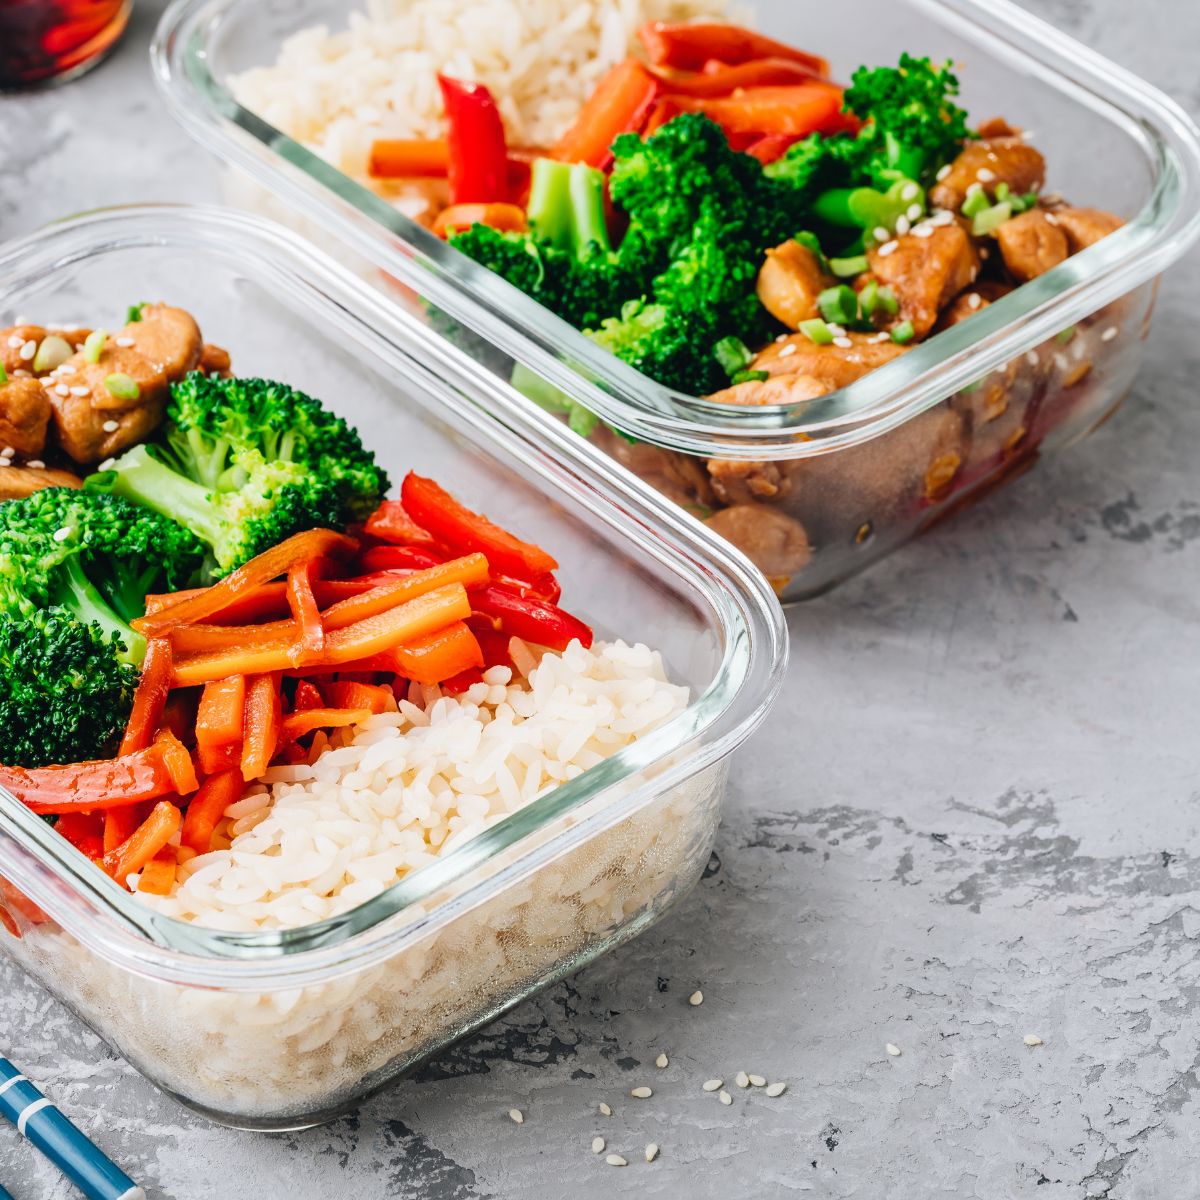 Two hot lunches in glass containers containing white rice, steamed broccoli, sauteed peppers and seasoned chicken with sesame seeds.